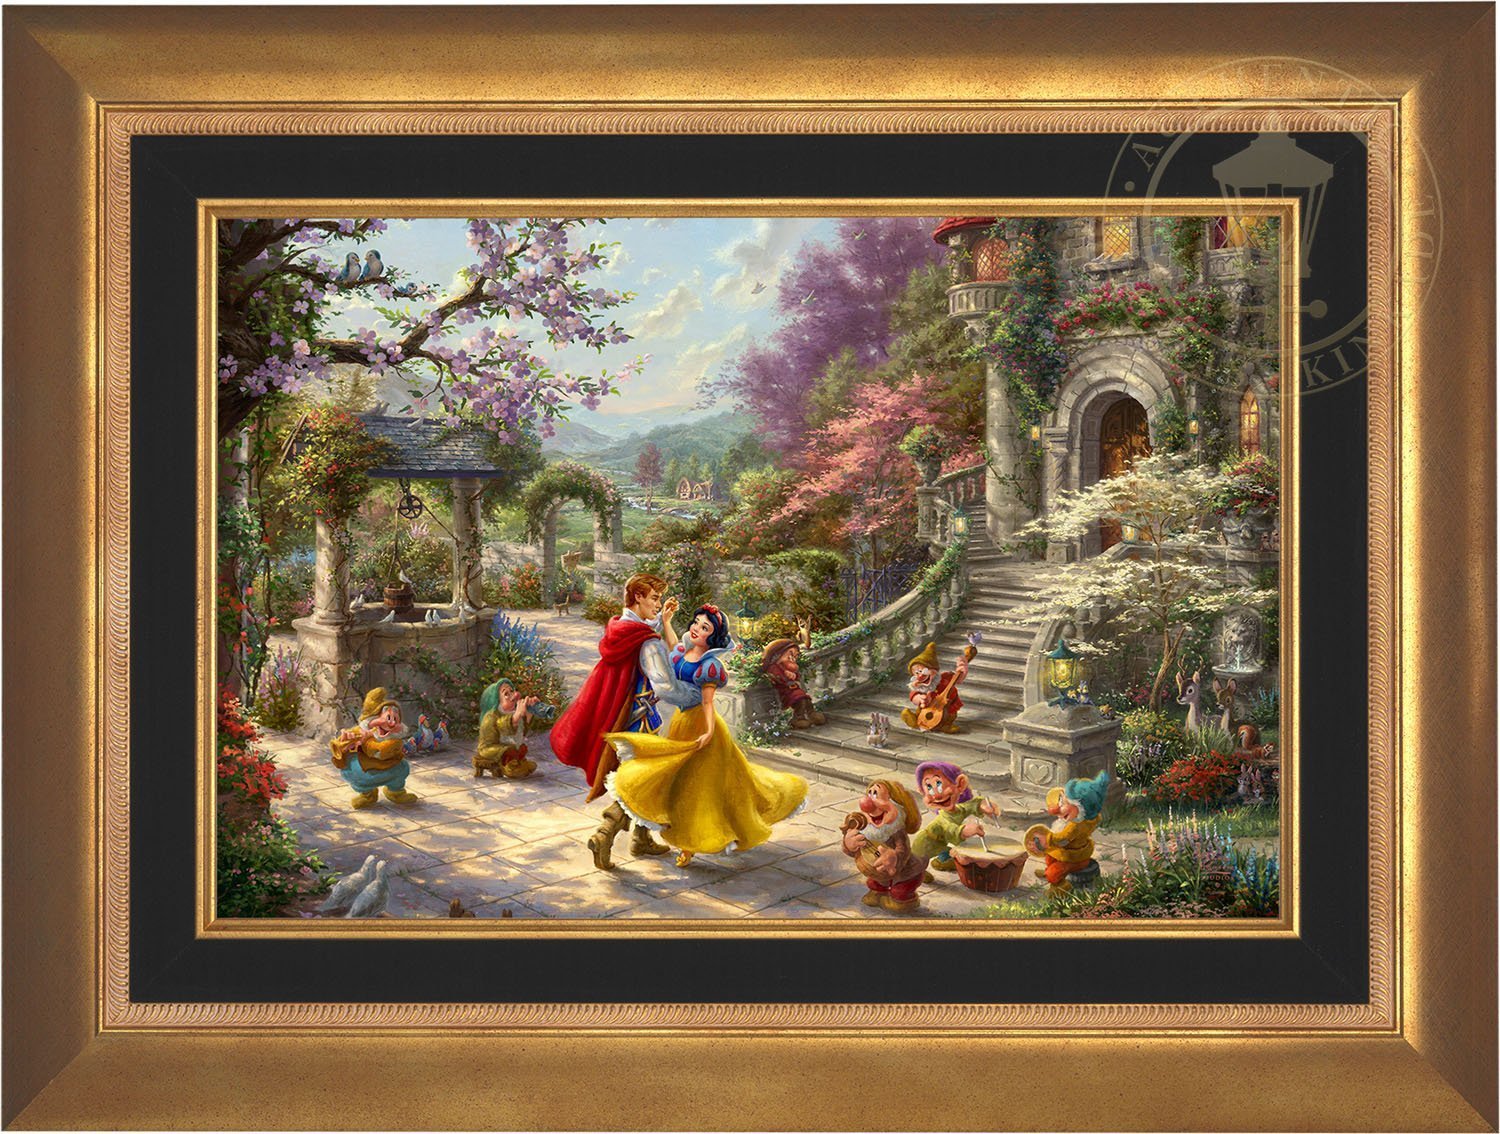 Snow White and the Prince dancing in the courtyard, accompanied by the Seven Dwarfs - Aurora Gold Frame